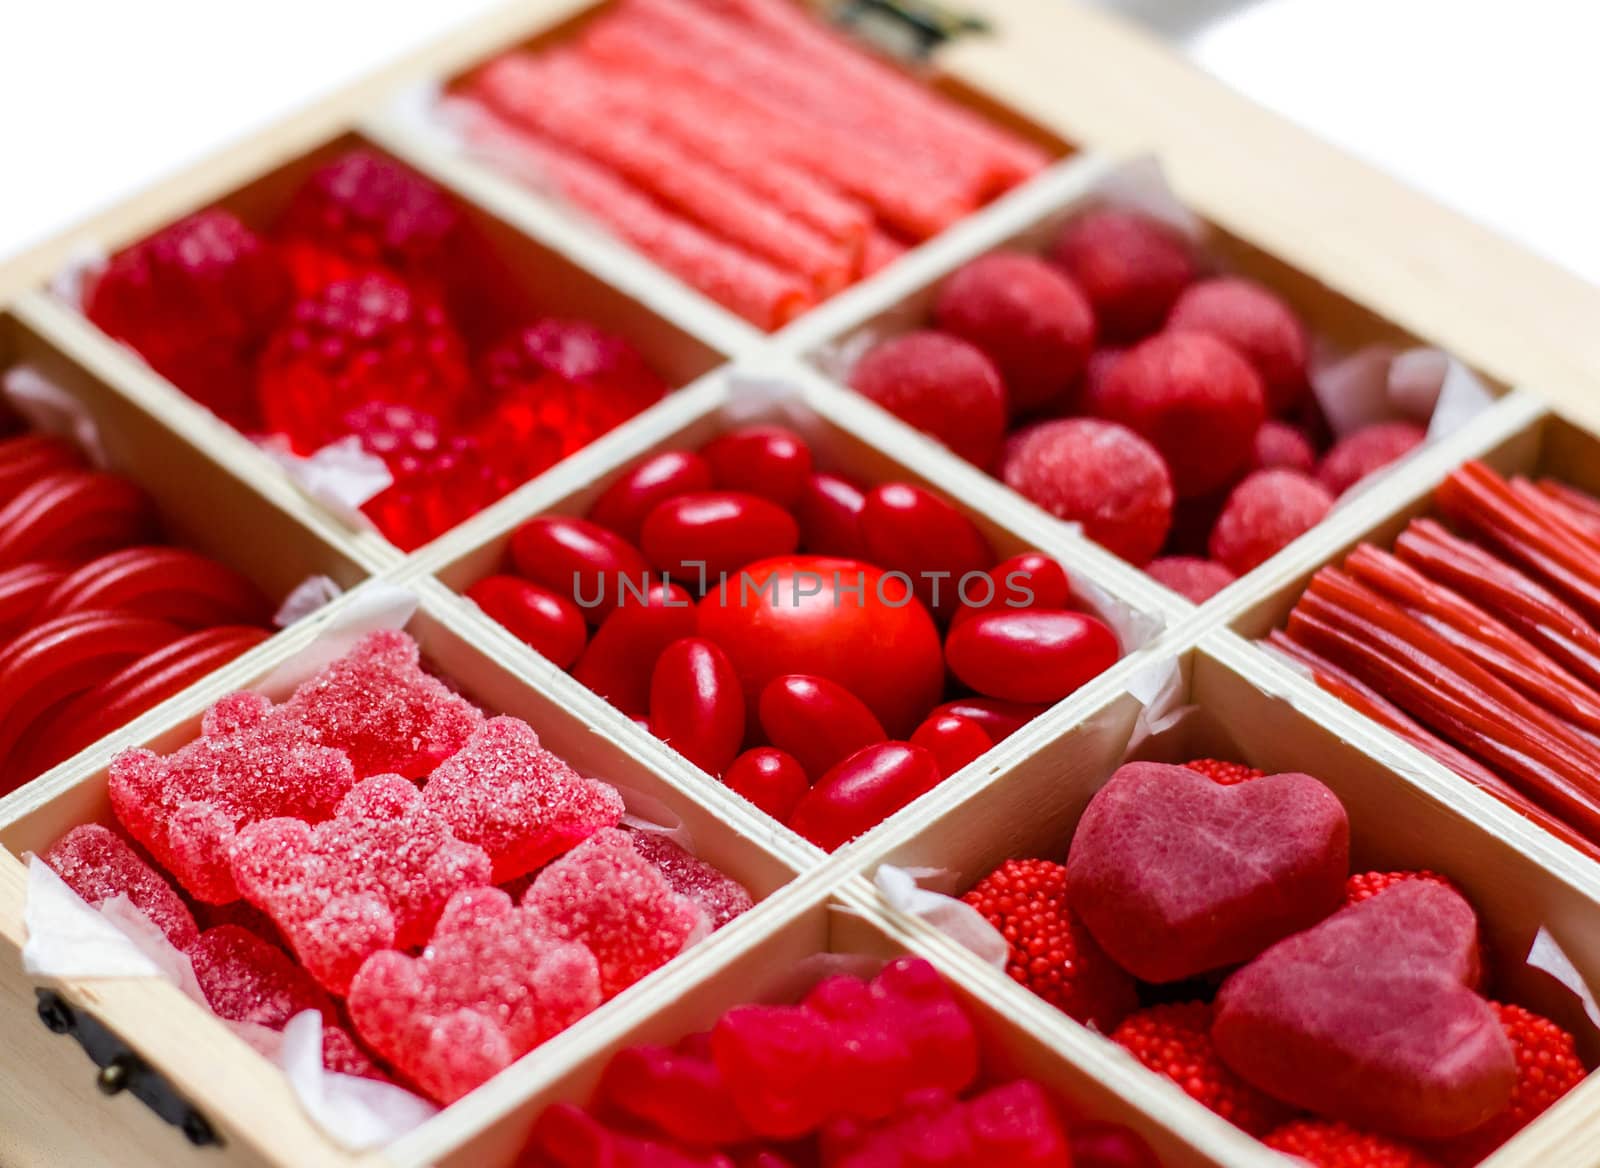 Candy assortment in a box by doble.d